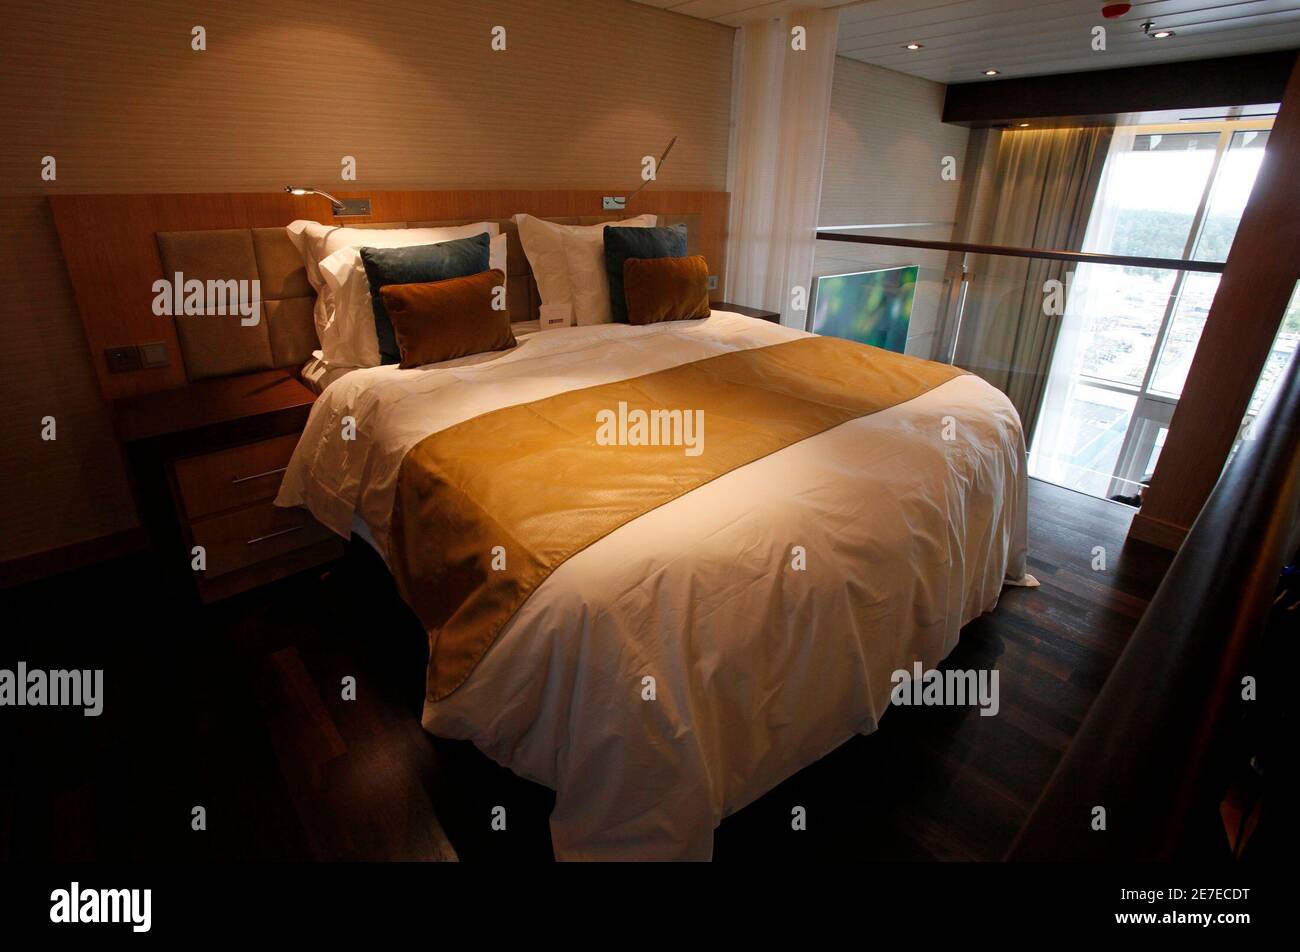 The bedroom of a loft suite is seen aboard the Royal Caribbean's Oasis of the Seas cruise ship which is under construction at the STX Europe shipyard in Turku August 27, 2009. The 225,000-ton ship will be the largest cruise vessel ever built and will be able to accommodate over 6,000 passengers. REUTERS/Bob Strong  (FINLAND SOCIETY TRAVEL) Stock Photo